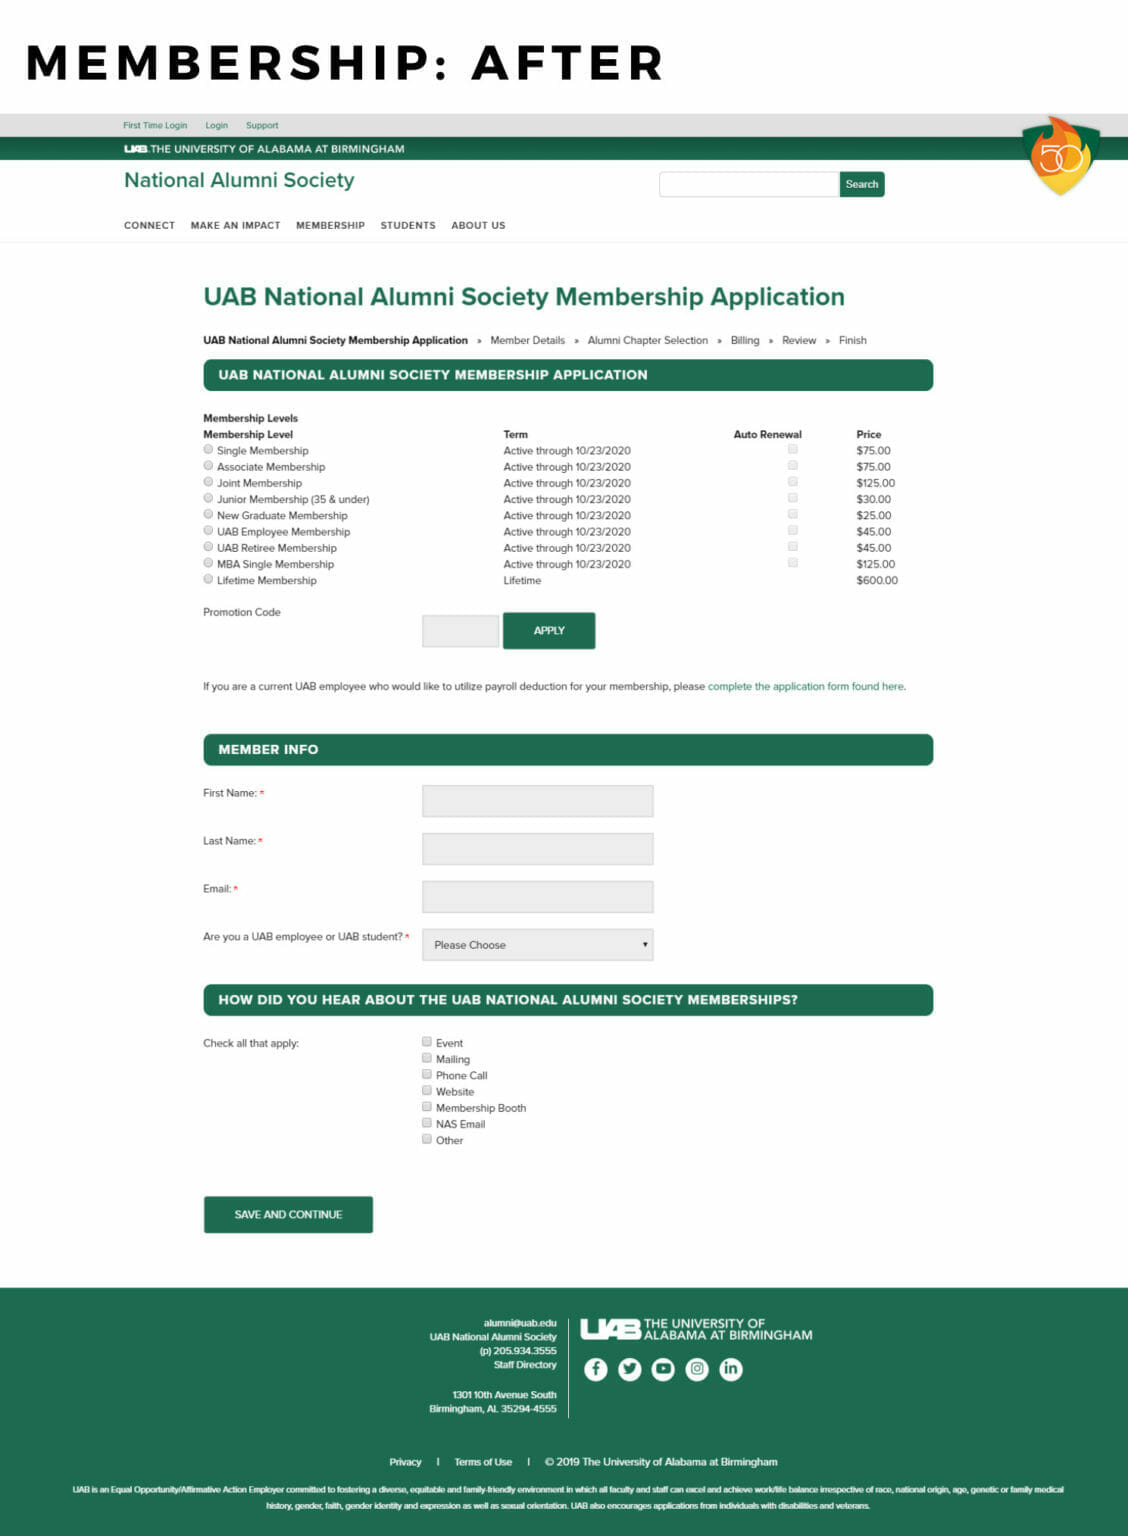 Screenshot of what the UAB Alumni website membership form looked like after implementation